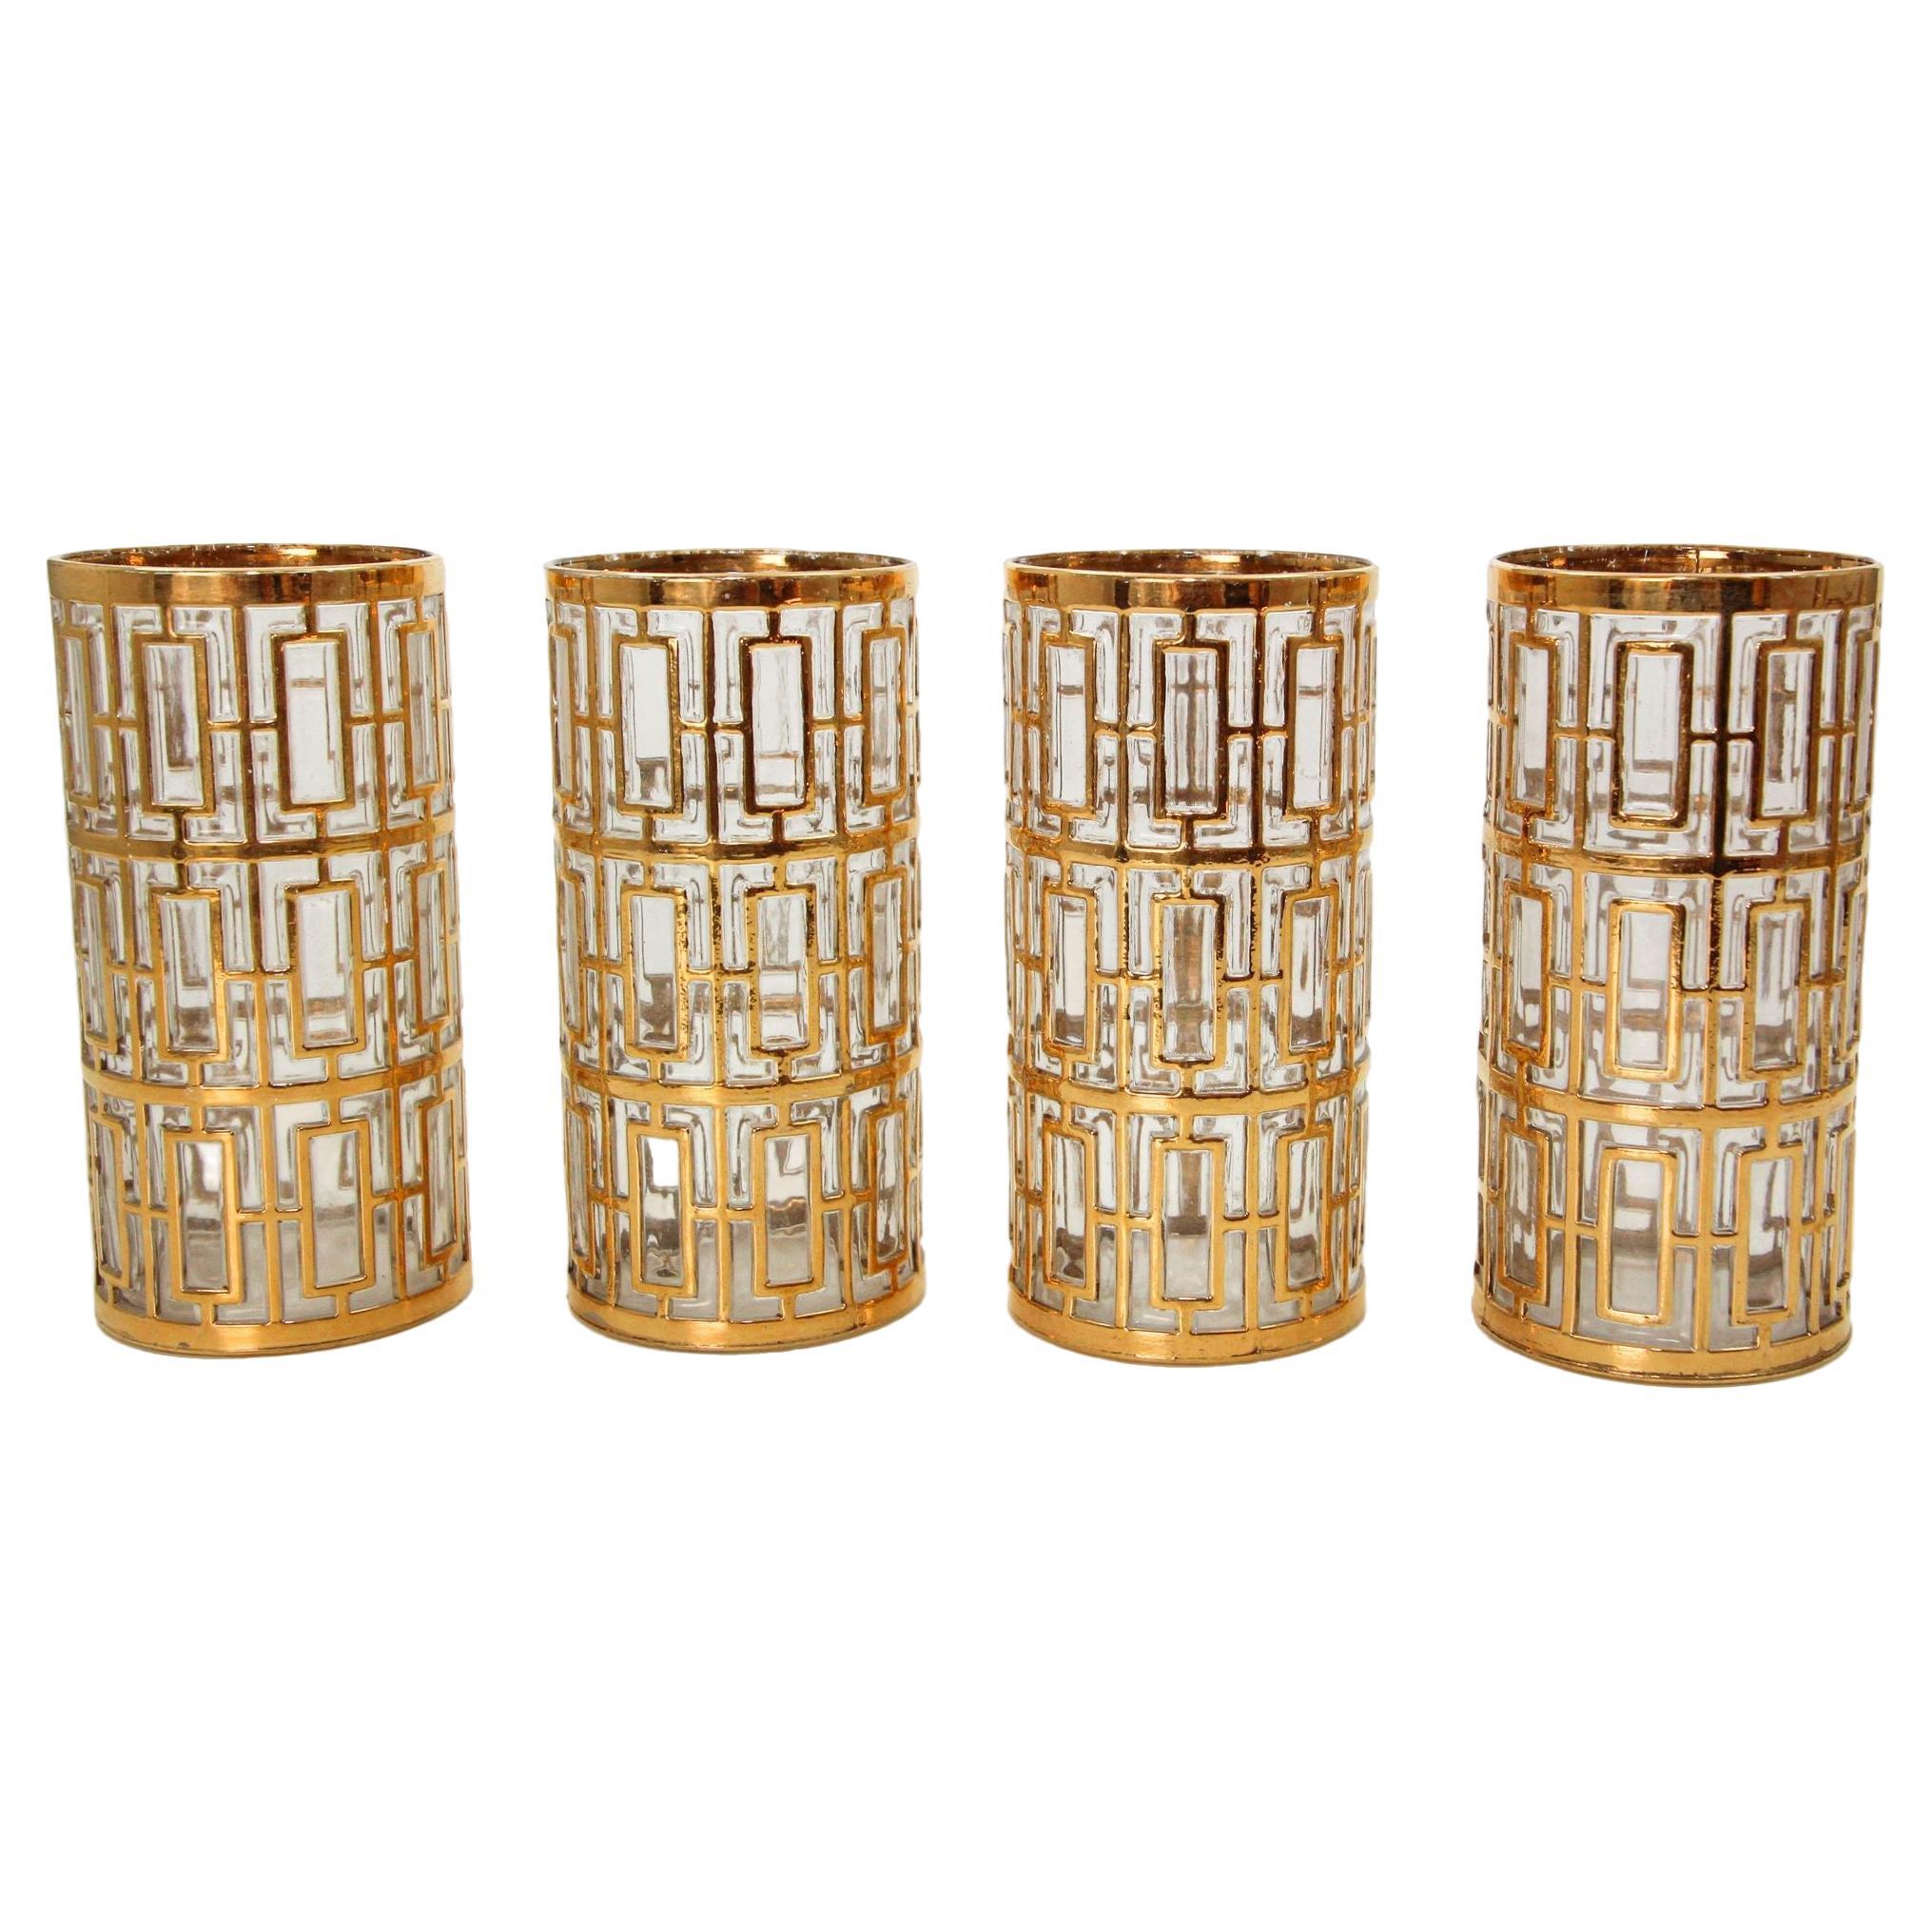 https://a.1stdibscdn.com/1960s-imperial-shoji-gold-cocktail-glasses-set-of-4-collectible-barware-for-sale/f_9068/f_371739621700495570790/f_37173962_1700495571522_bg_processed.jpg